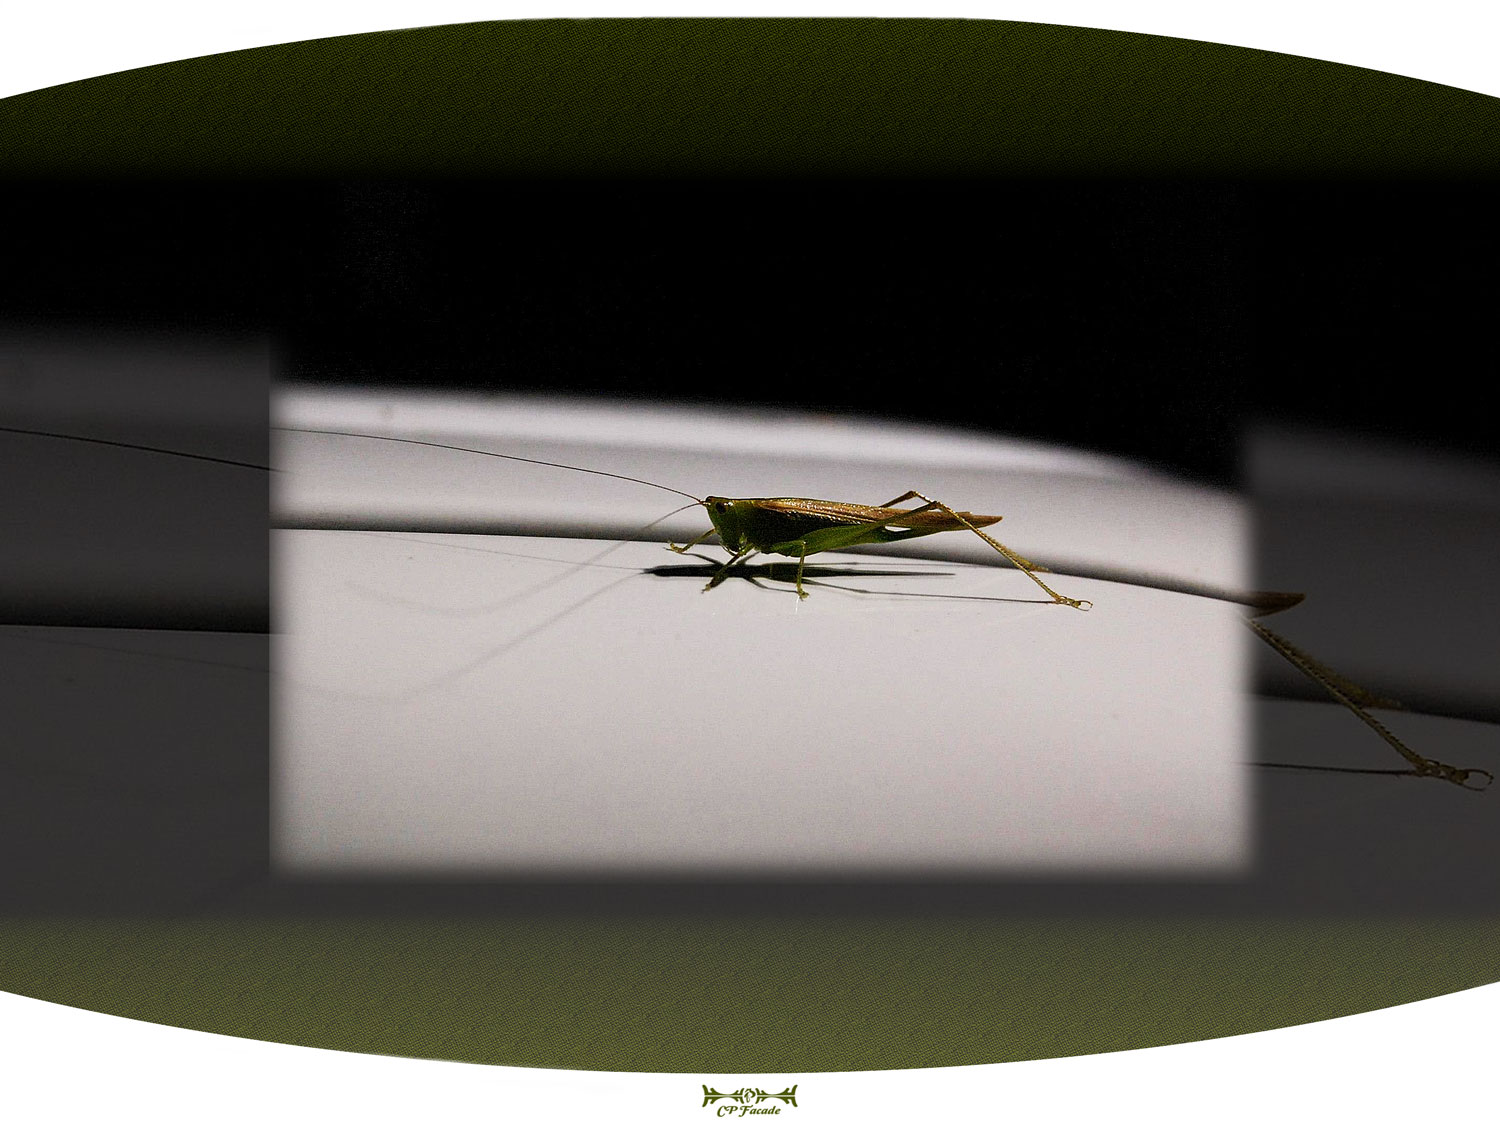 Macro shot of grasshopper in profile sitting on car roof